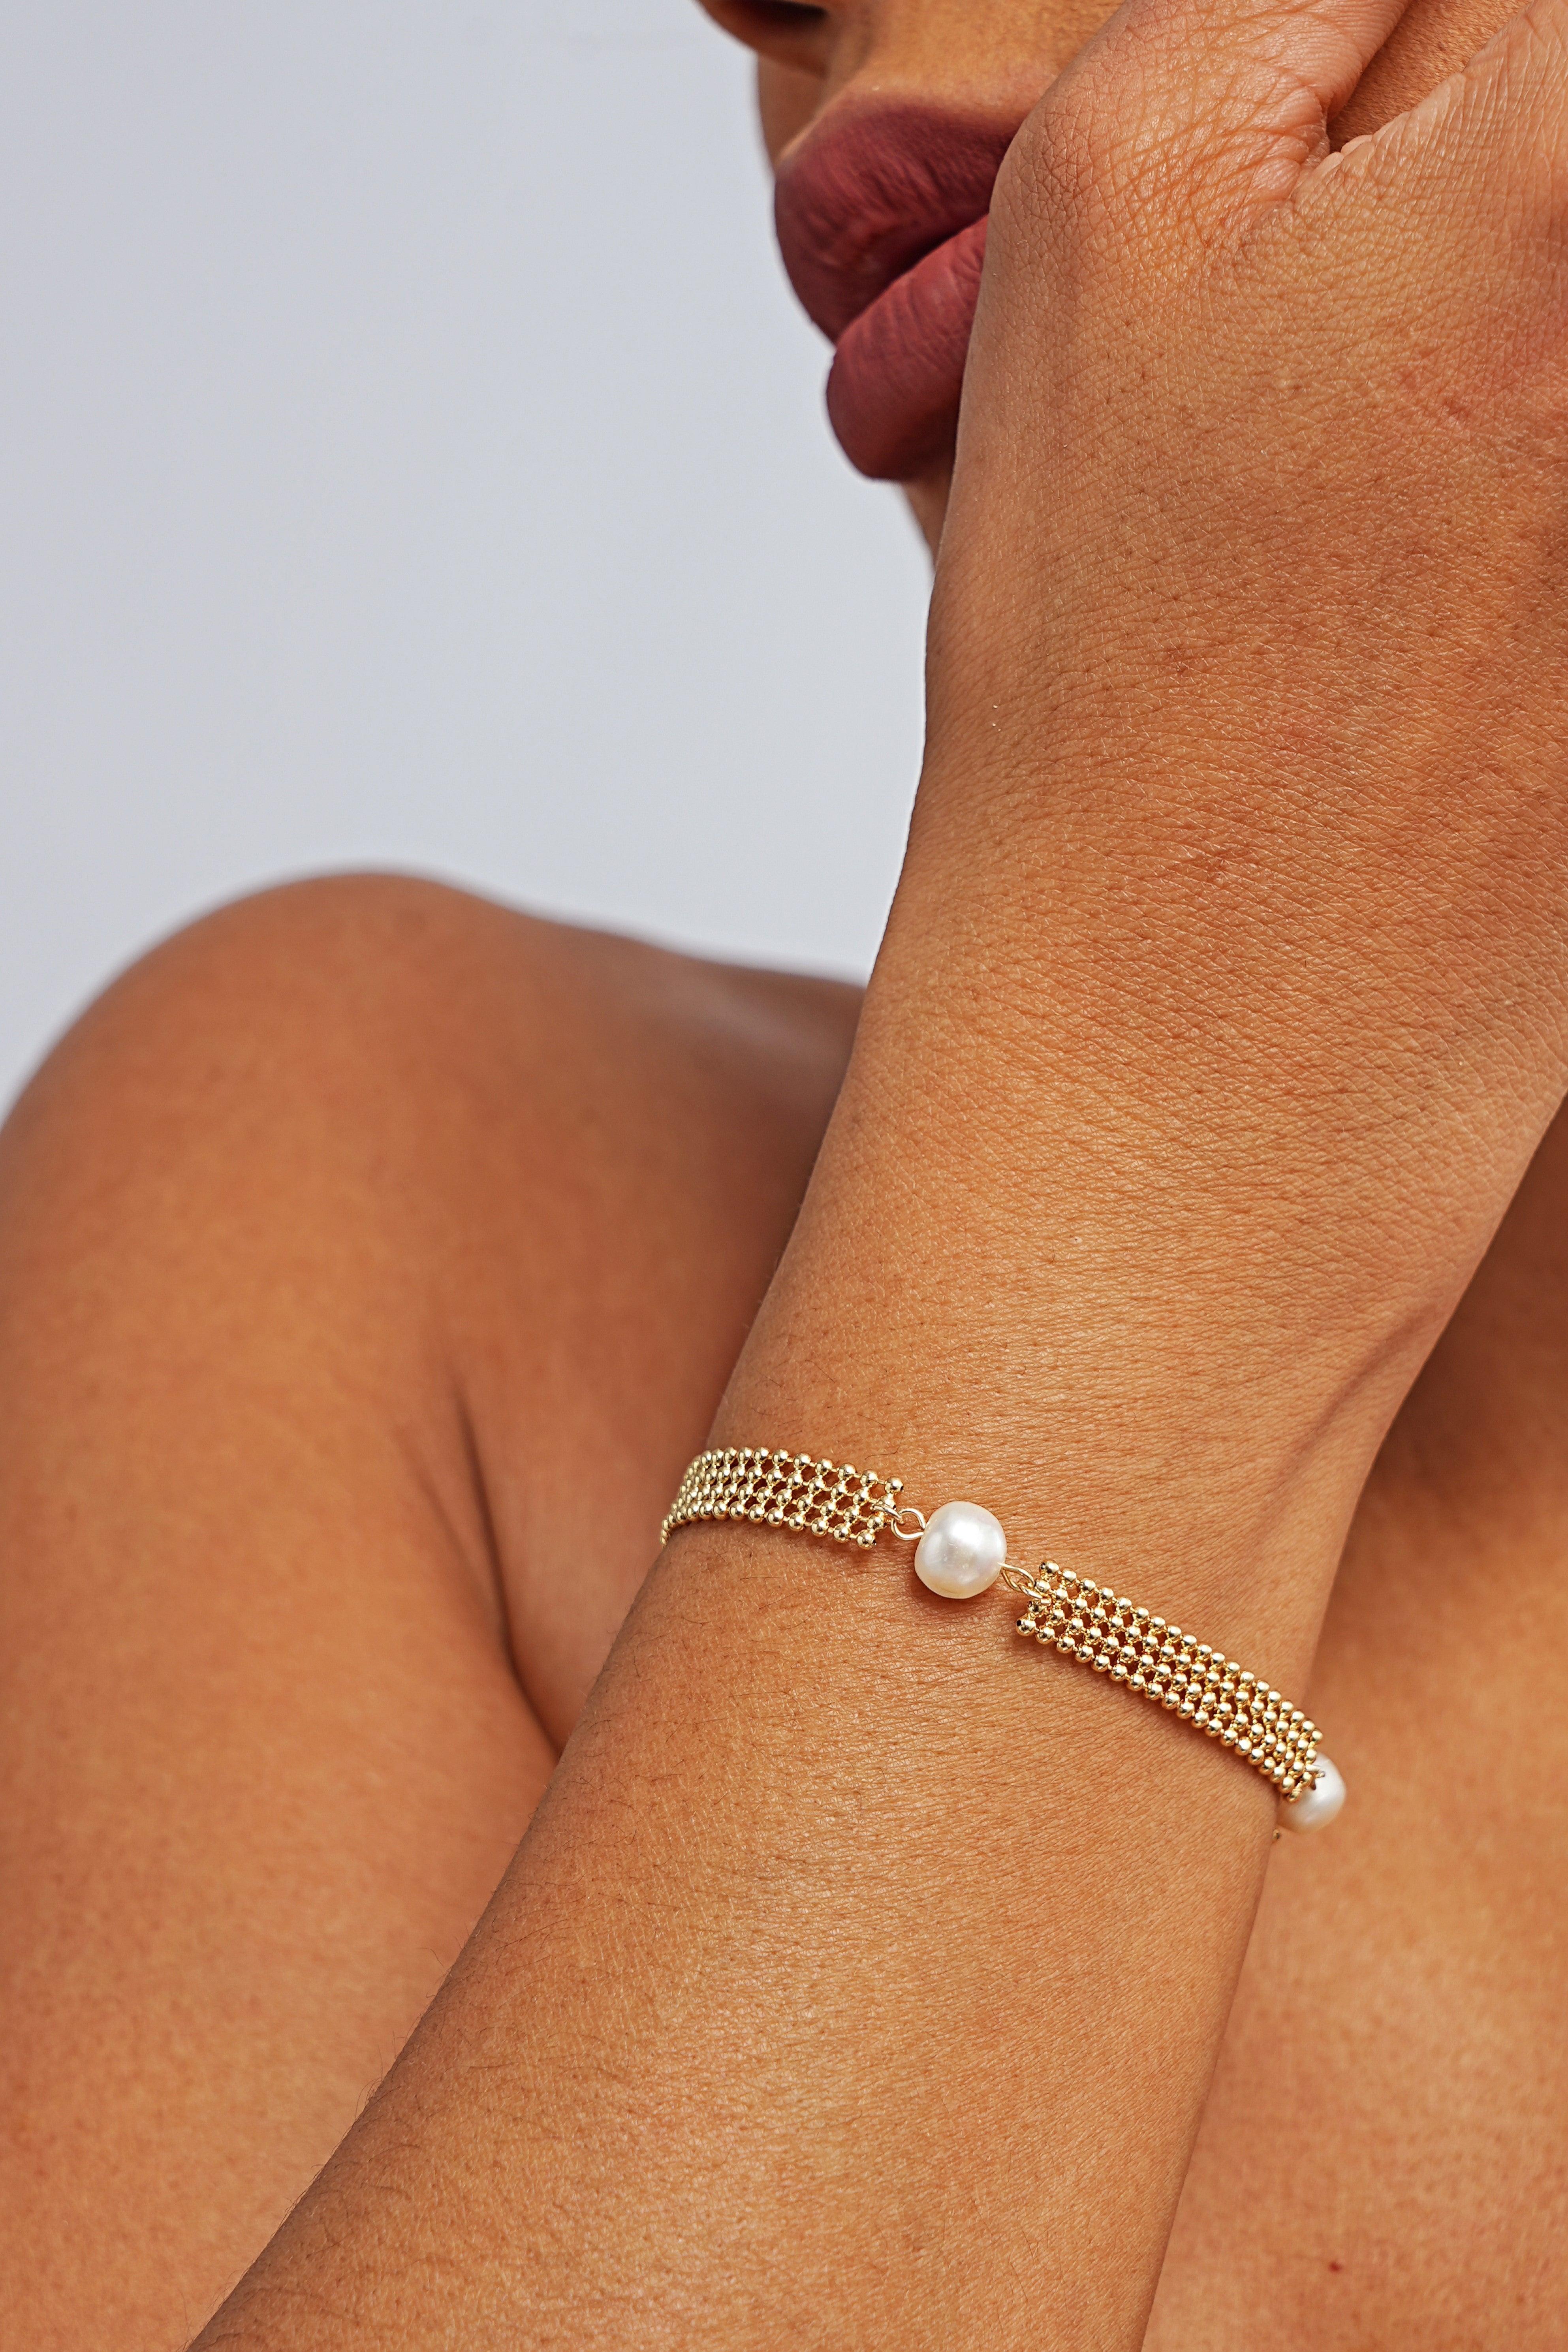 Woven Gold with Pearl Bracelet - Artsory